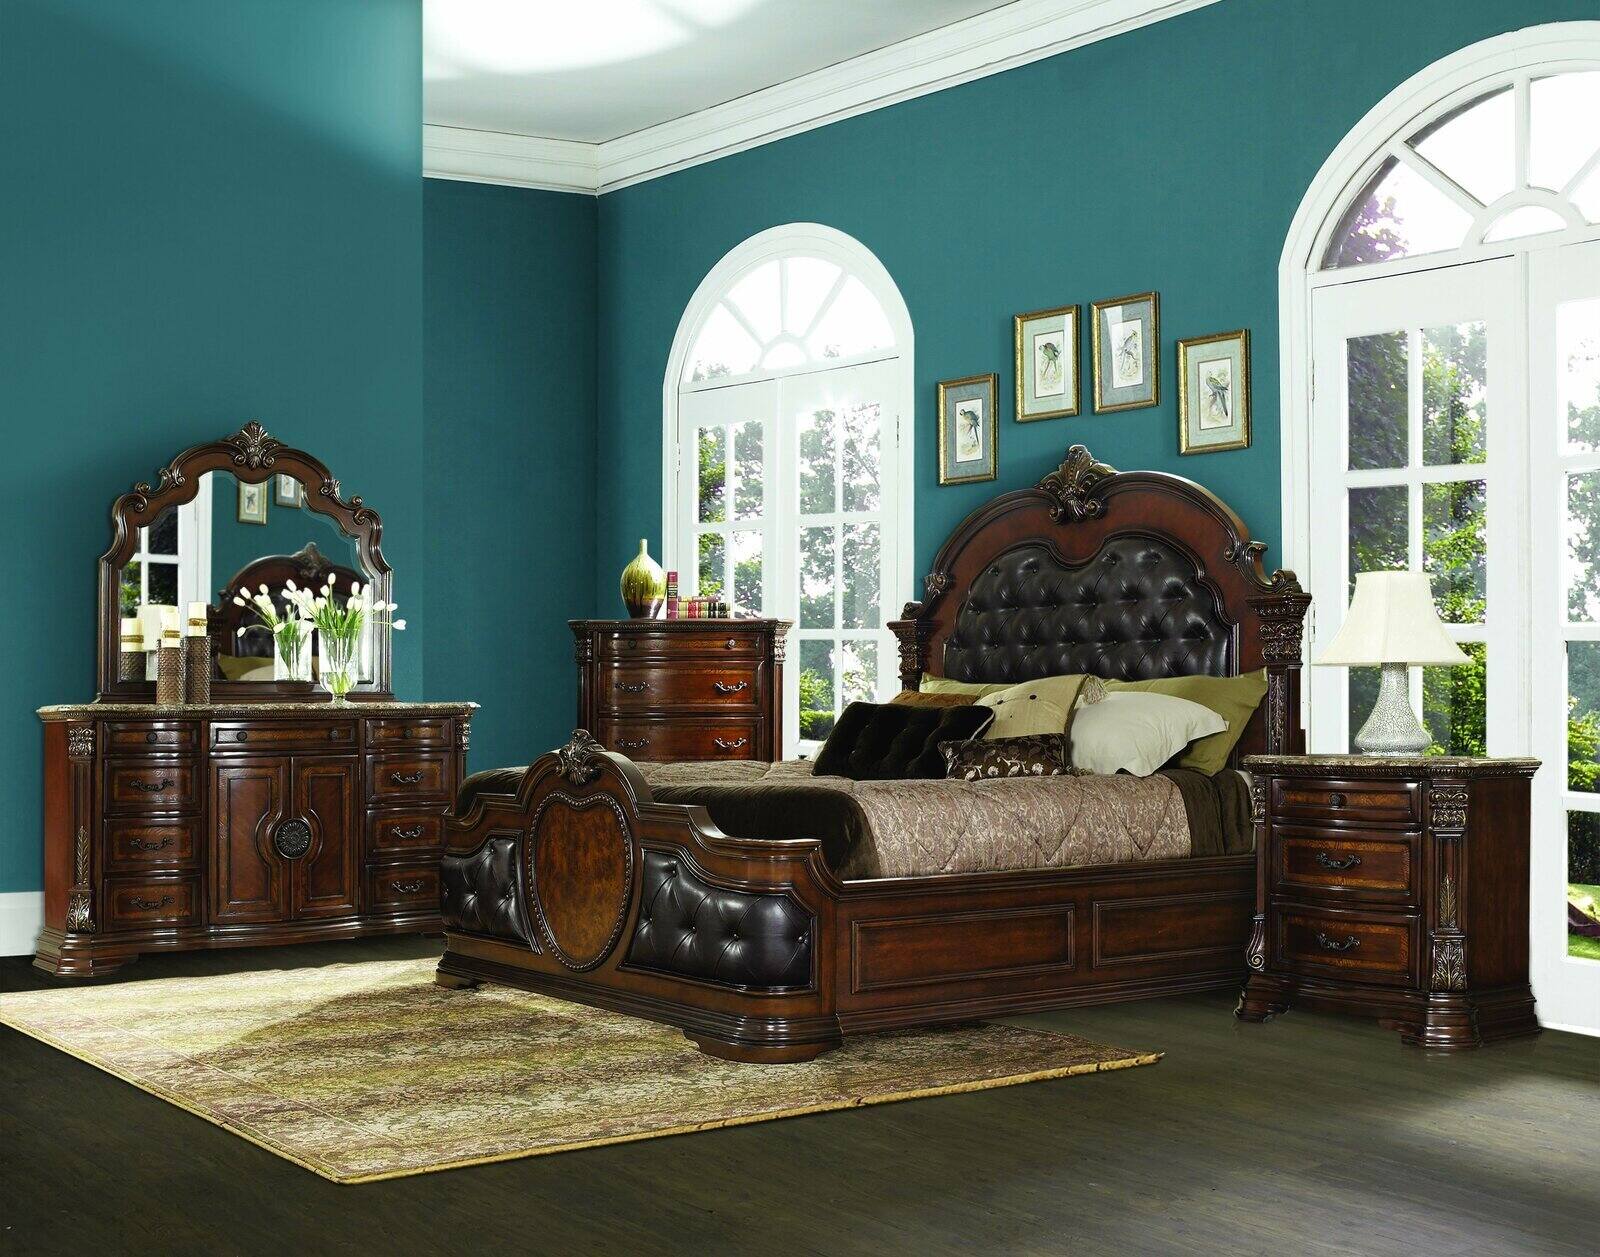 The Perfect Paint Color For Your Antique Cherrywood Bedroom Set